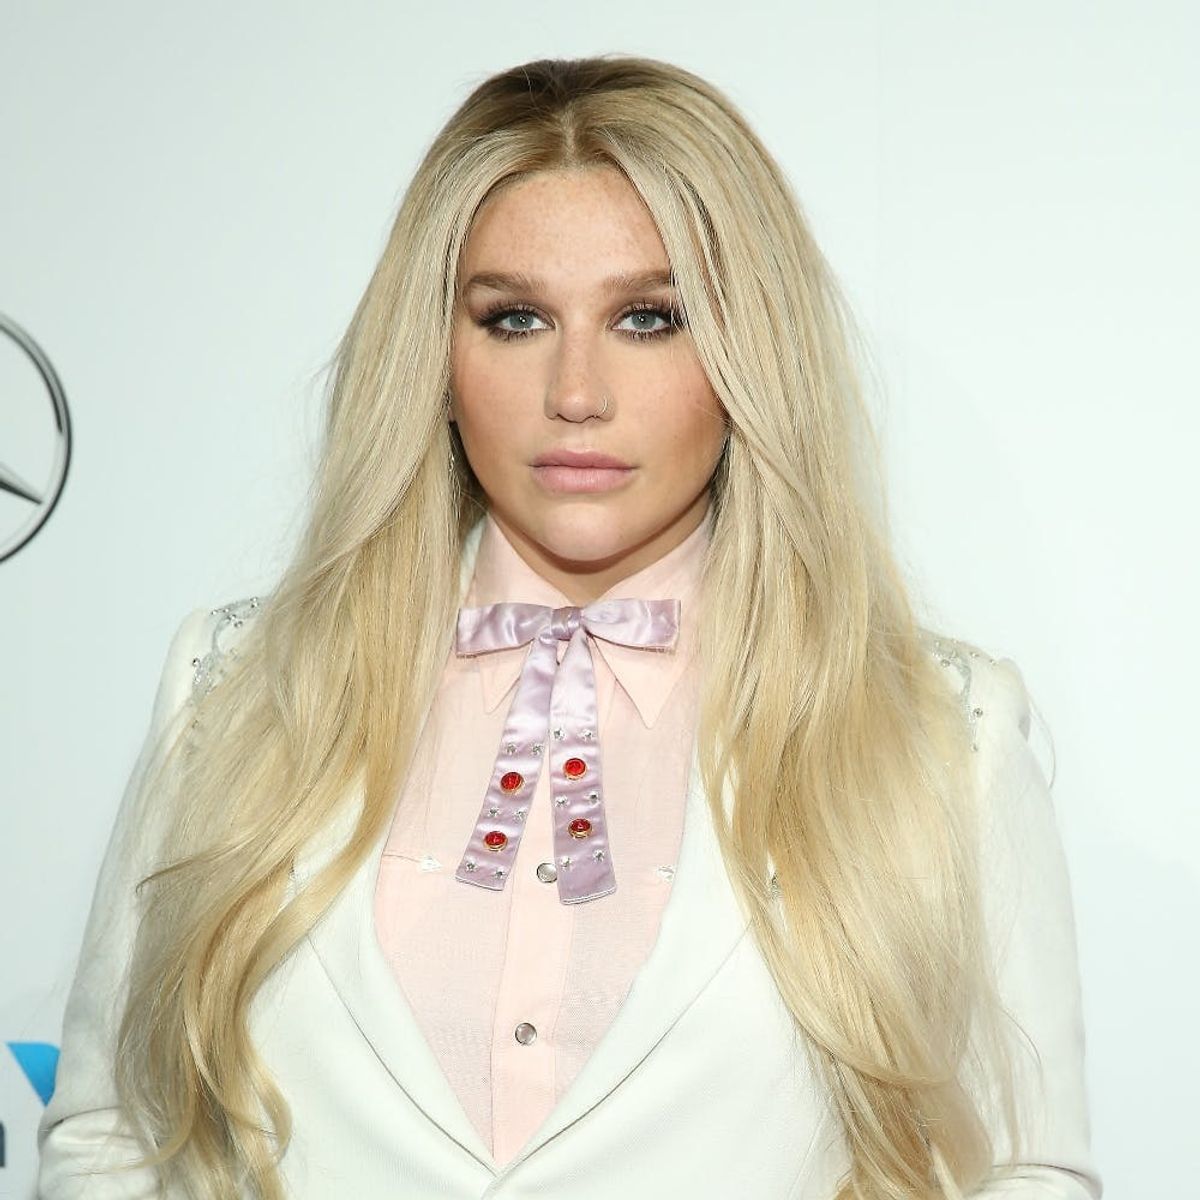 Newly Public Emails from Dr. Luke to Kesha Prove He Body-Shamed Her